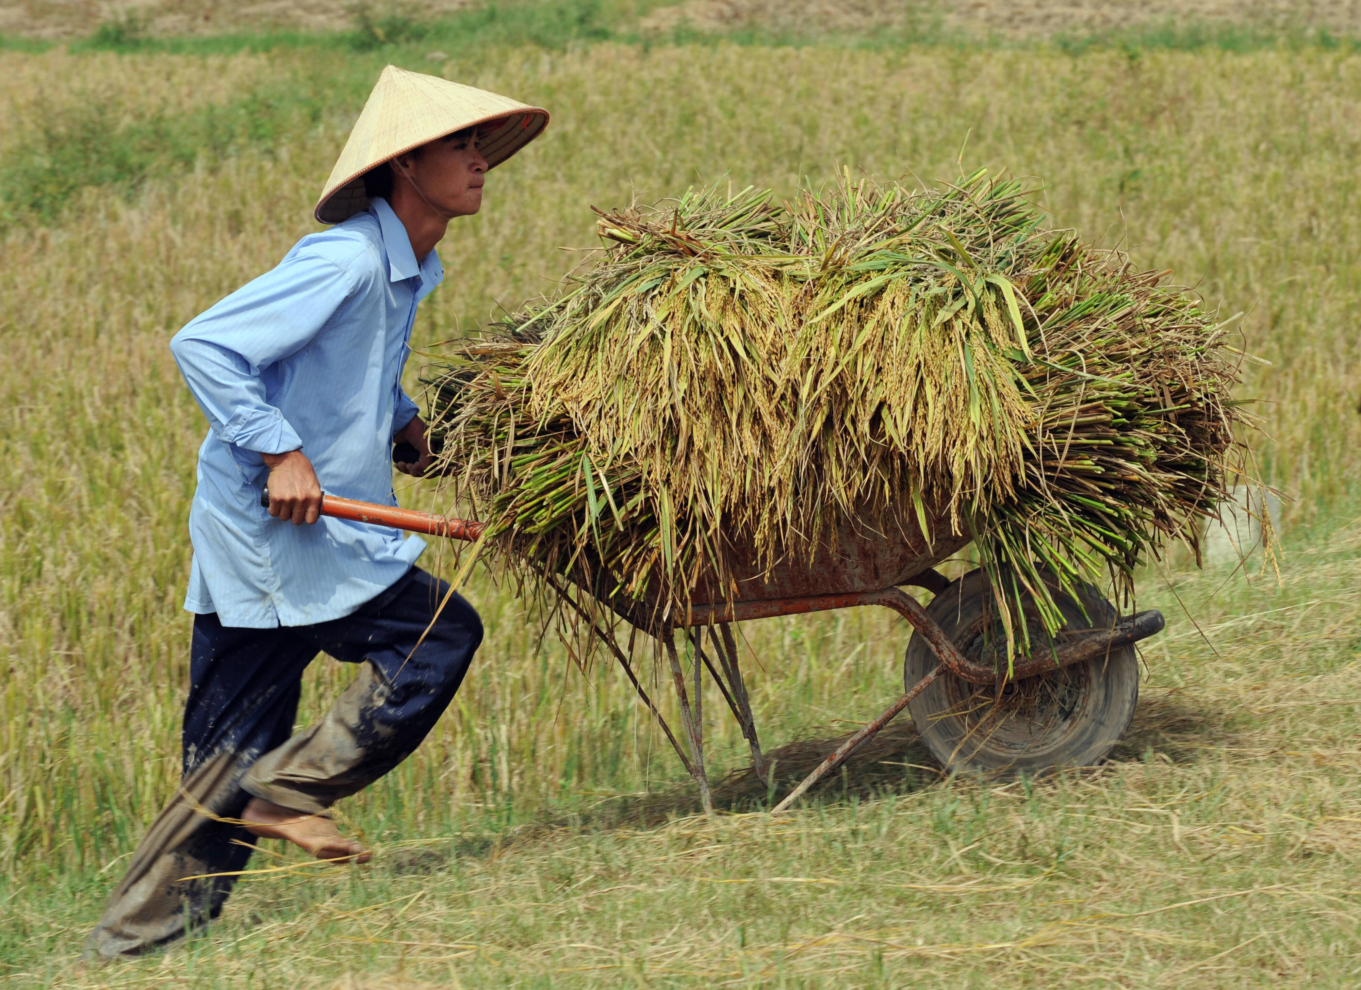 A farmer pushes a cart loaded with harvested rice in a field in the suburbs of Hanoi on October 2, 2008. AFP PHOTO / HOANG DINH Nam (Photo credit should read HOANG DINH NAM/AFP via Getty Images)